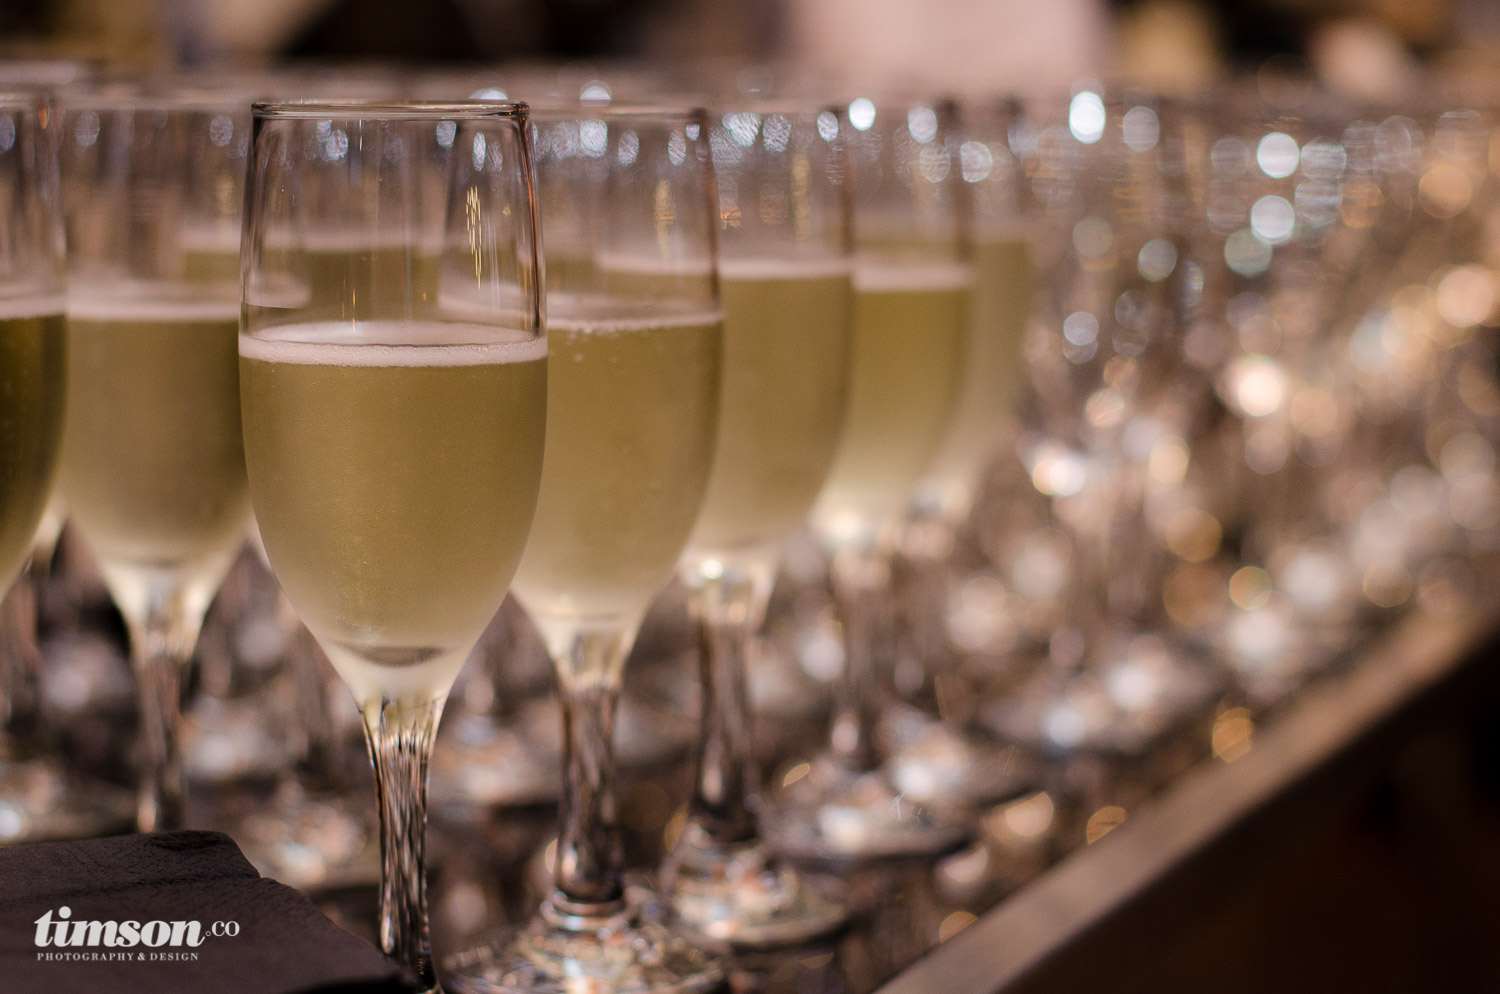 French bubbly at the ready for toasting at the Melt: Massage for Couples launch